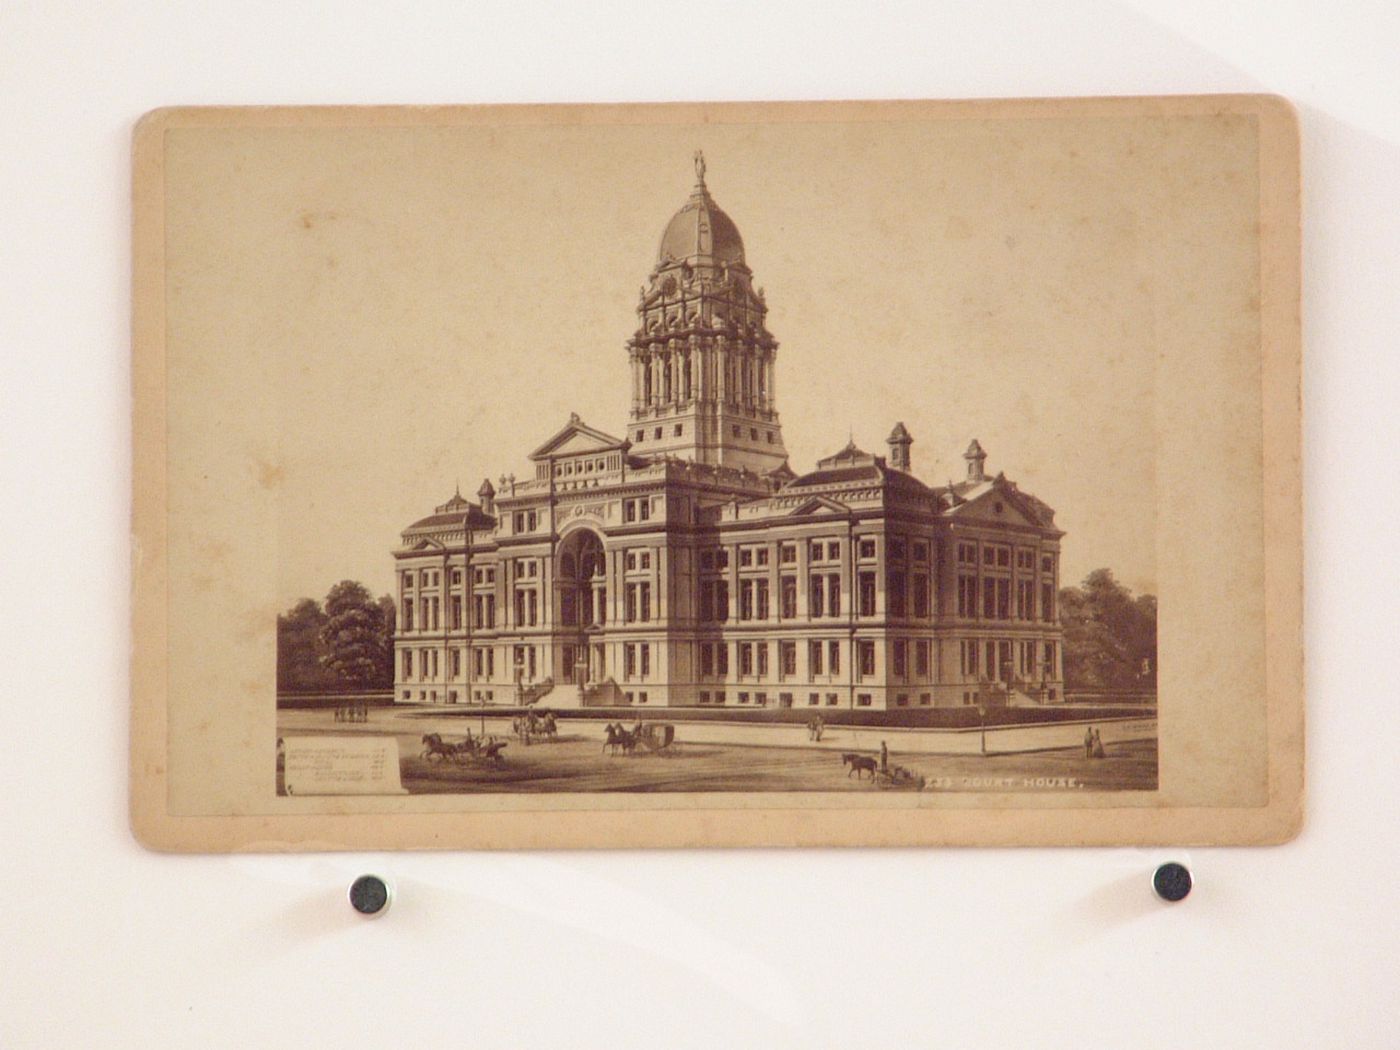 Photograph of a rendering of an unidentified courthouse, United States